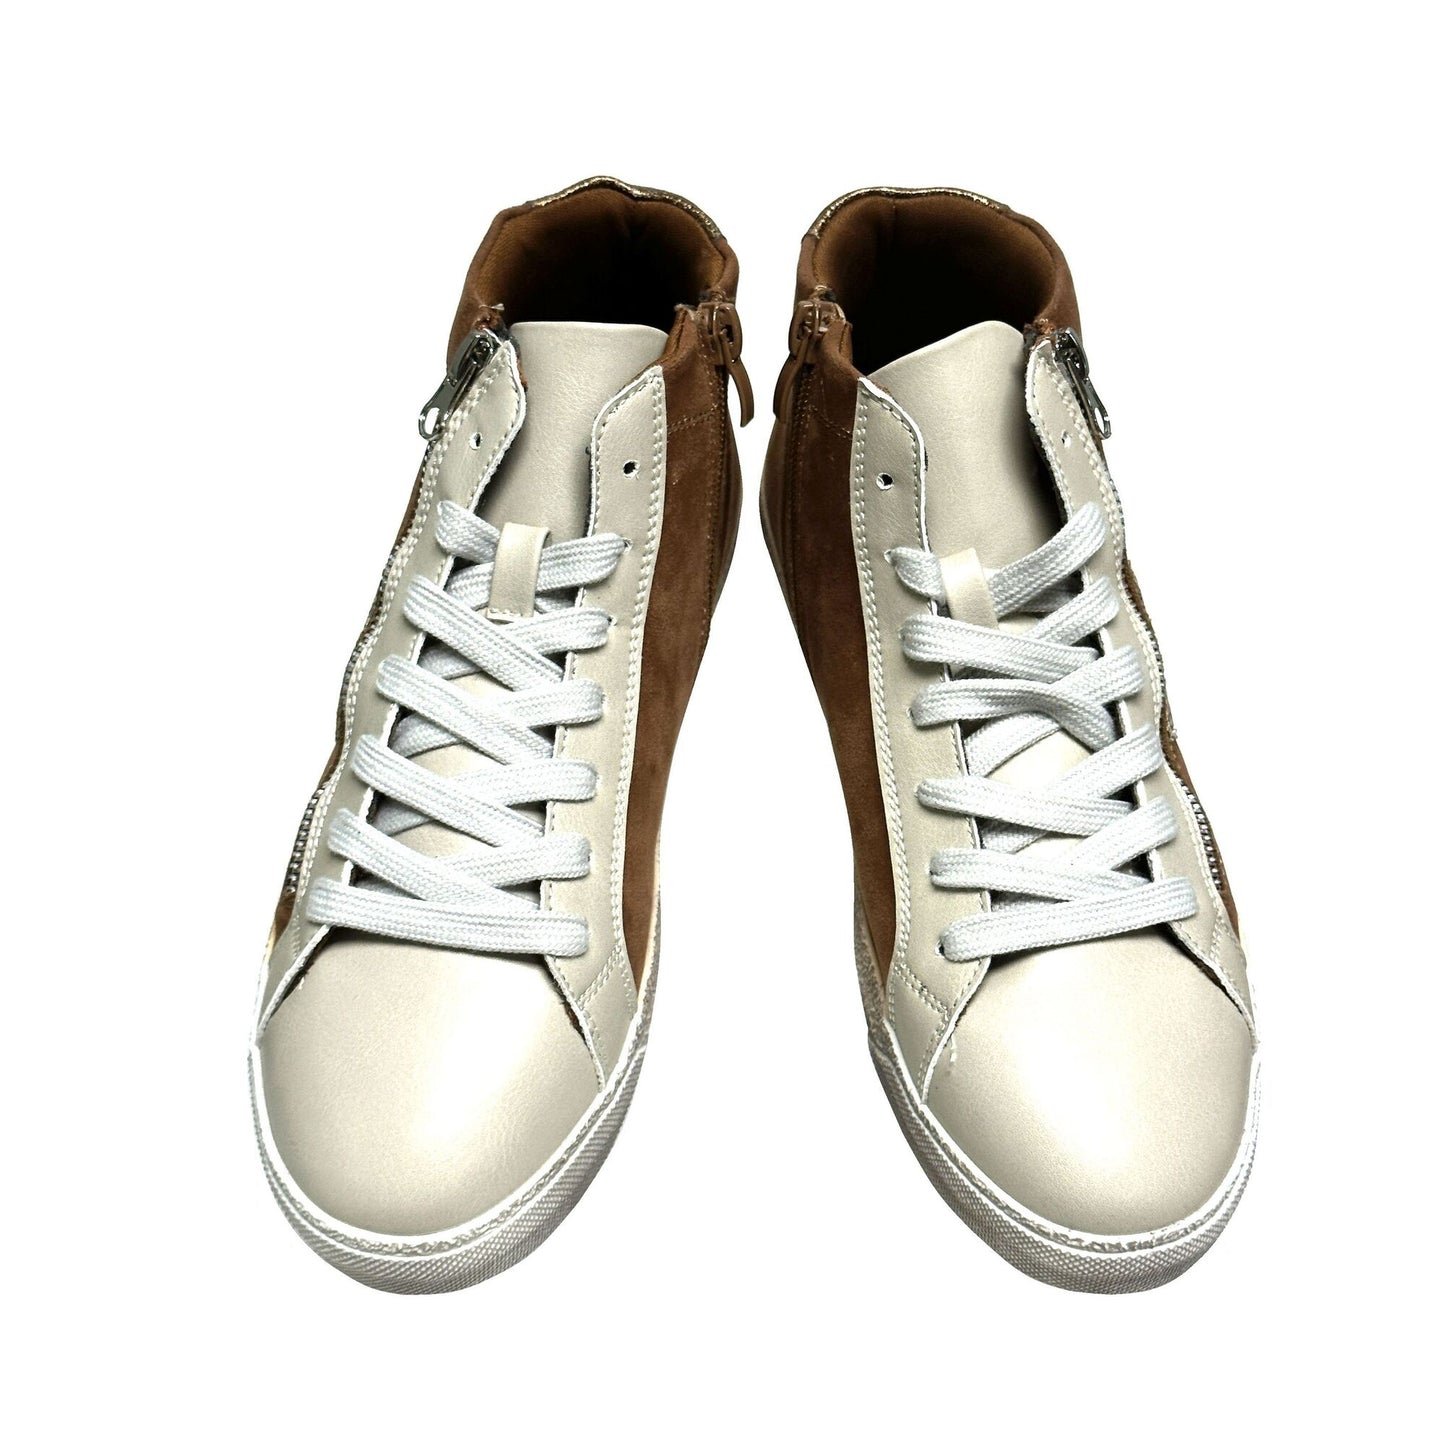 Ninety Union BLISS High Top Athletic Fashion Sneaker With Mixed Texture - ninetyunion